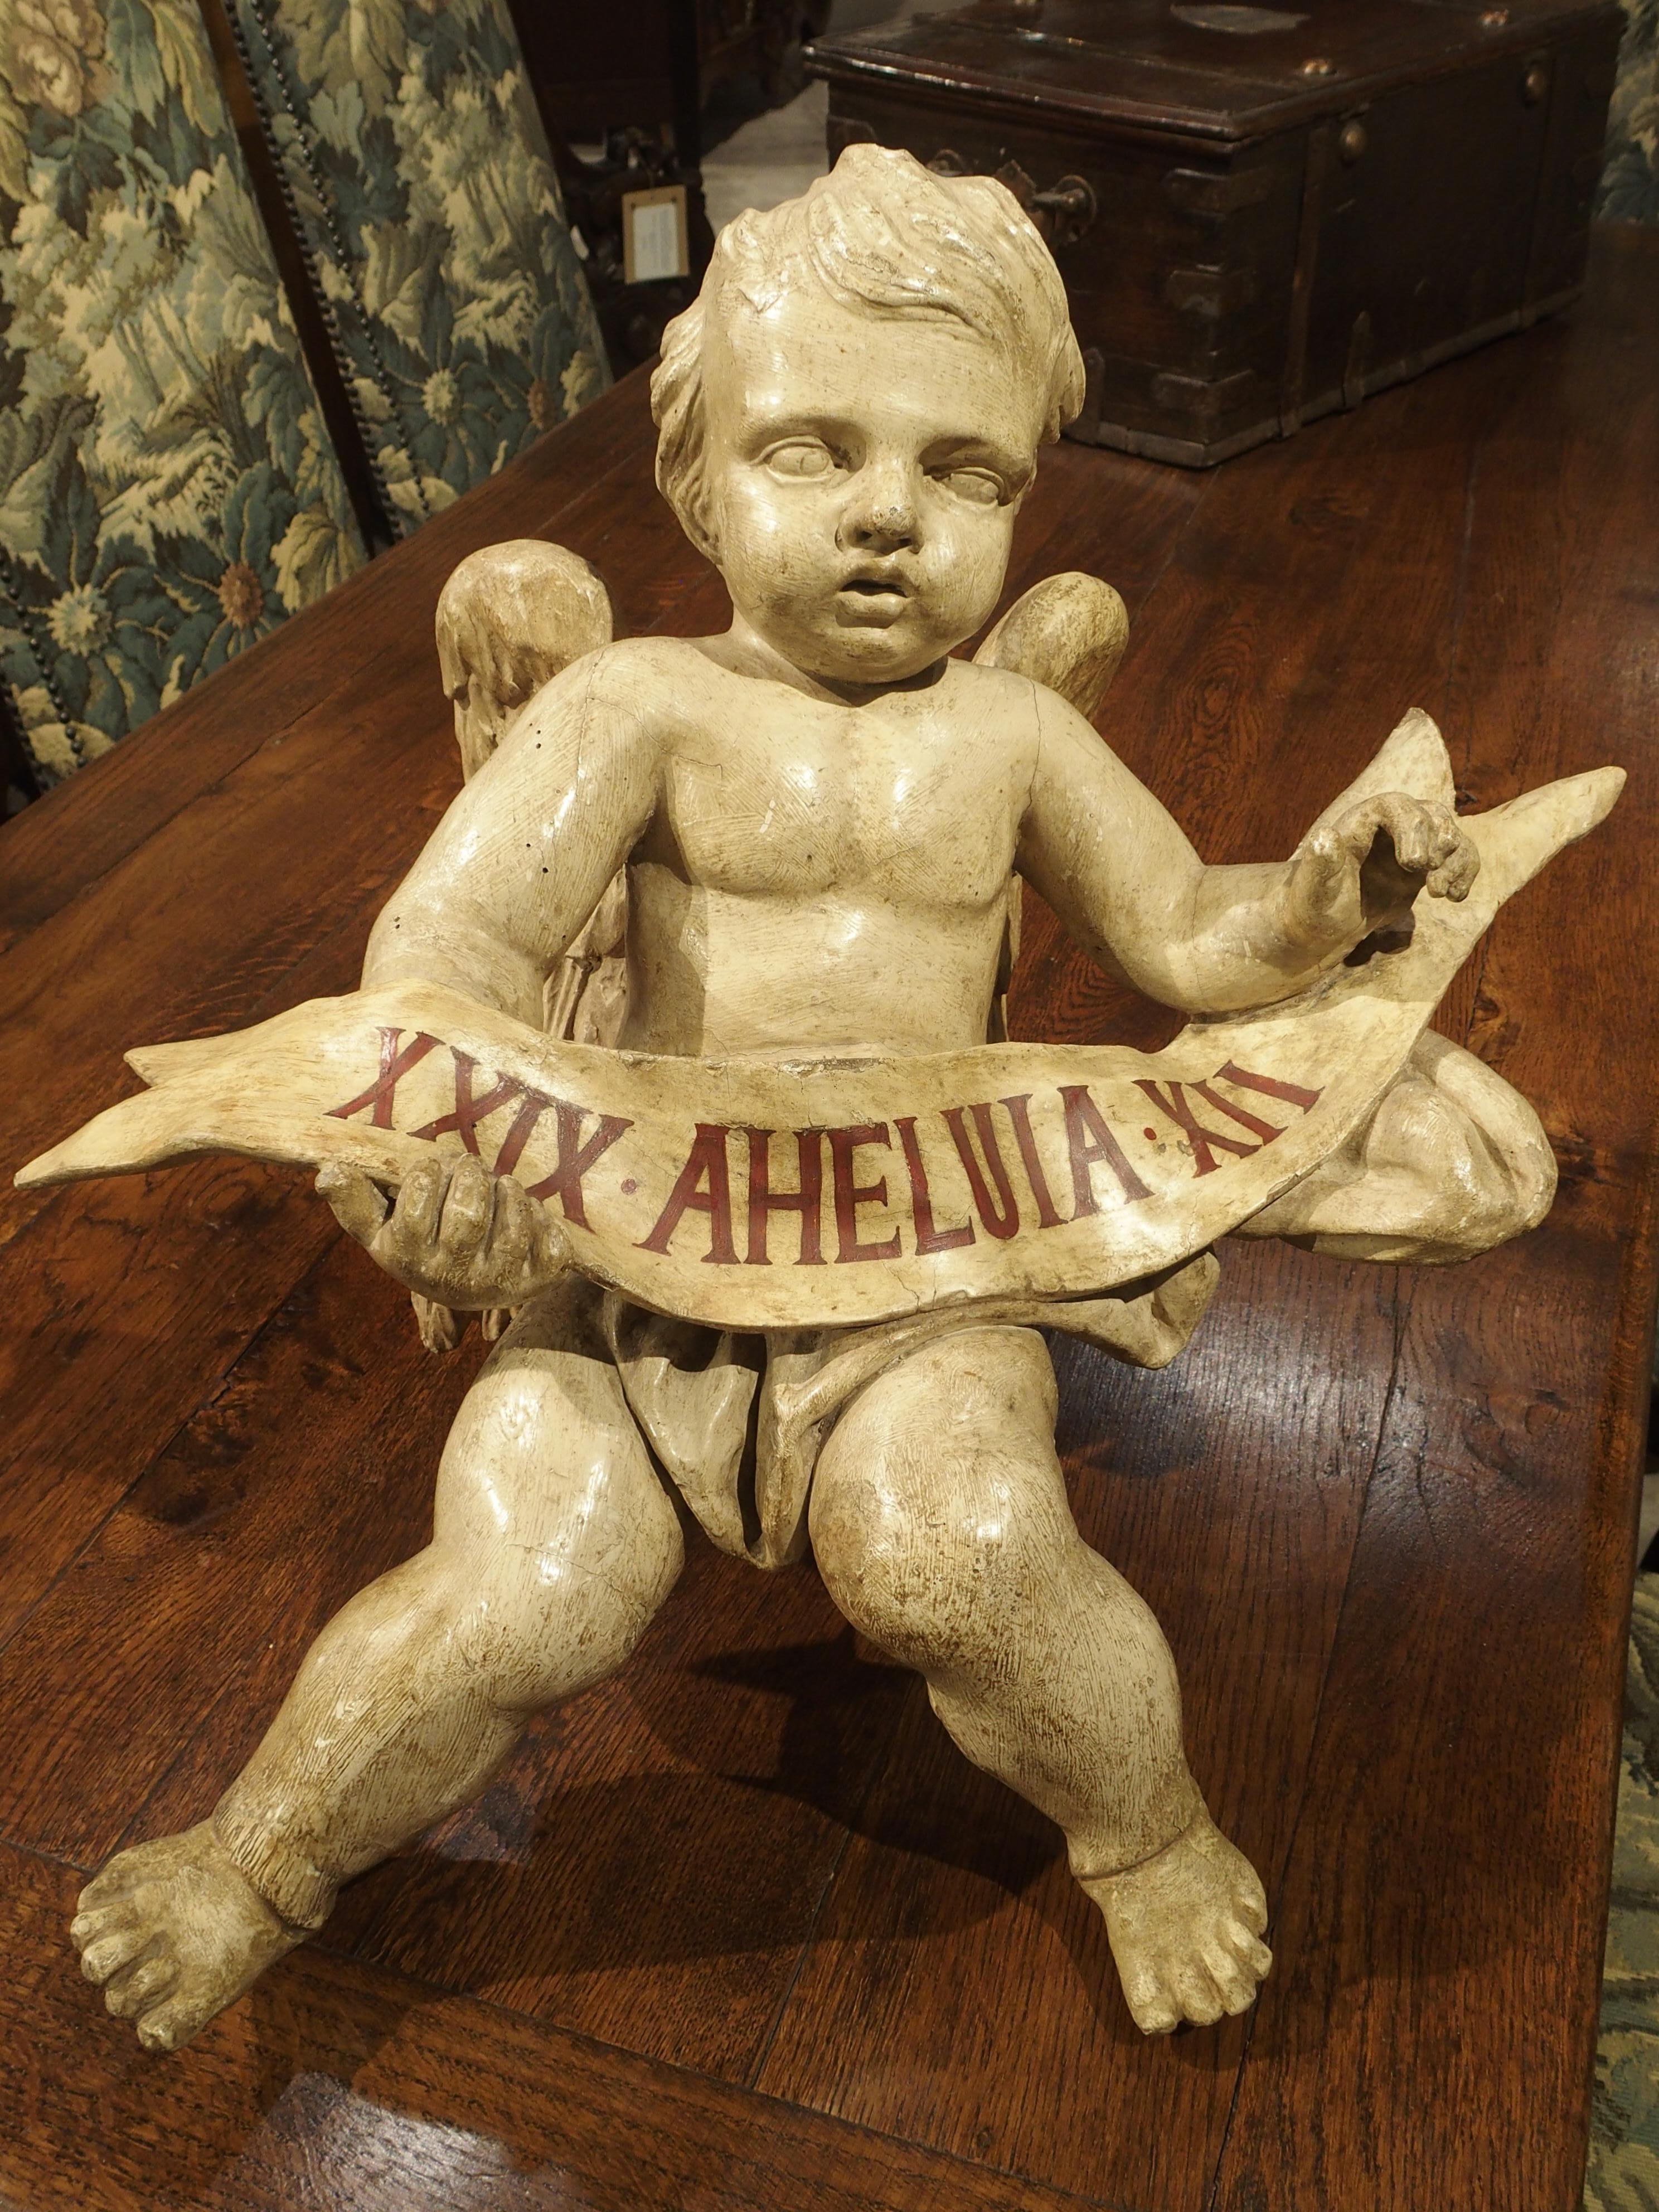 This is a carved and painted wooden cherub statue from Italy. On the back, between the cherubs wings, is an eyelet for hanging. It was originally commissioned by and hung in a private chapel or church. It has been expertly carved as evidenced by